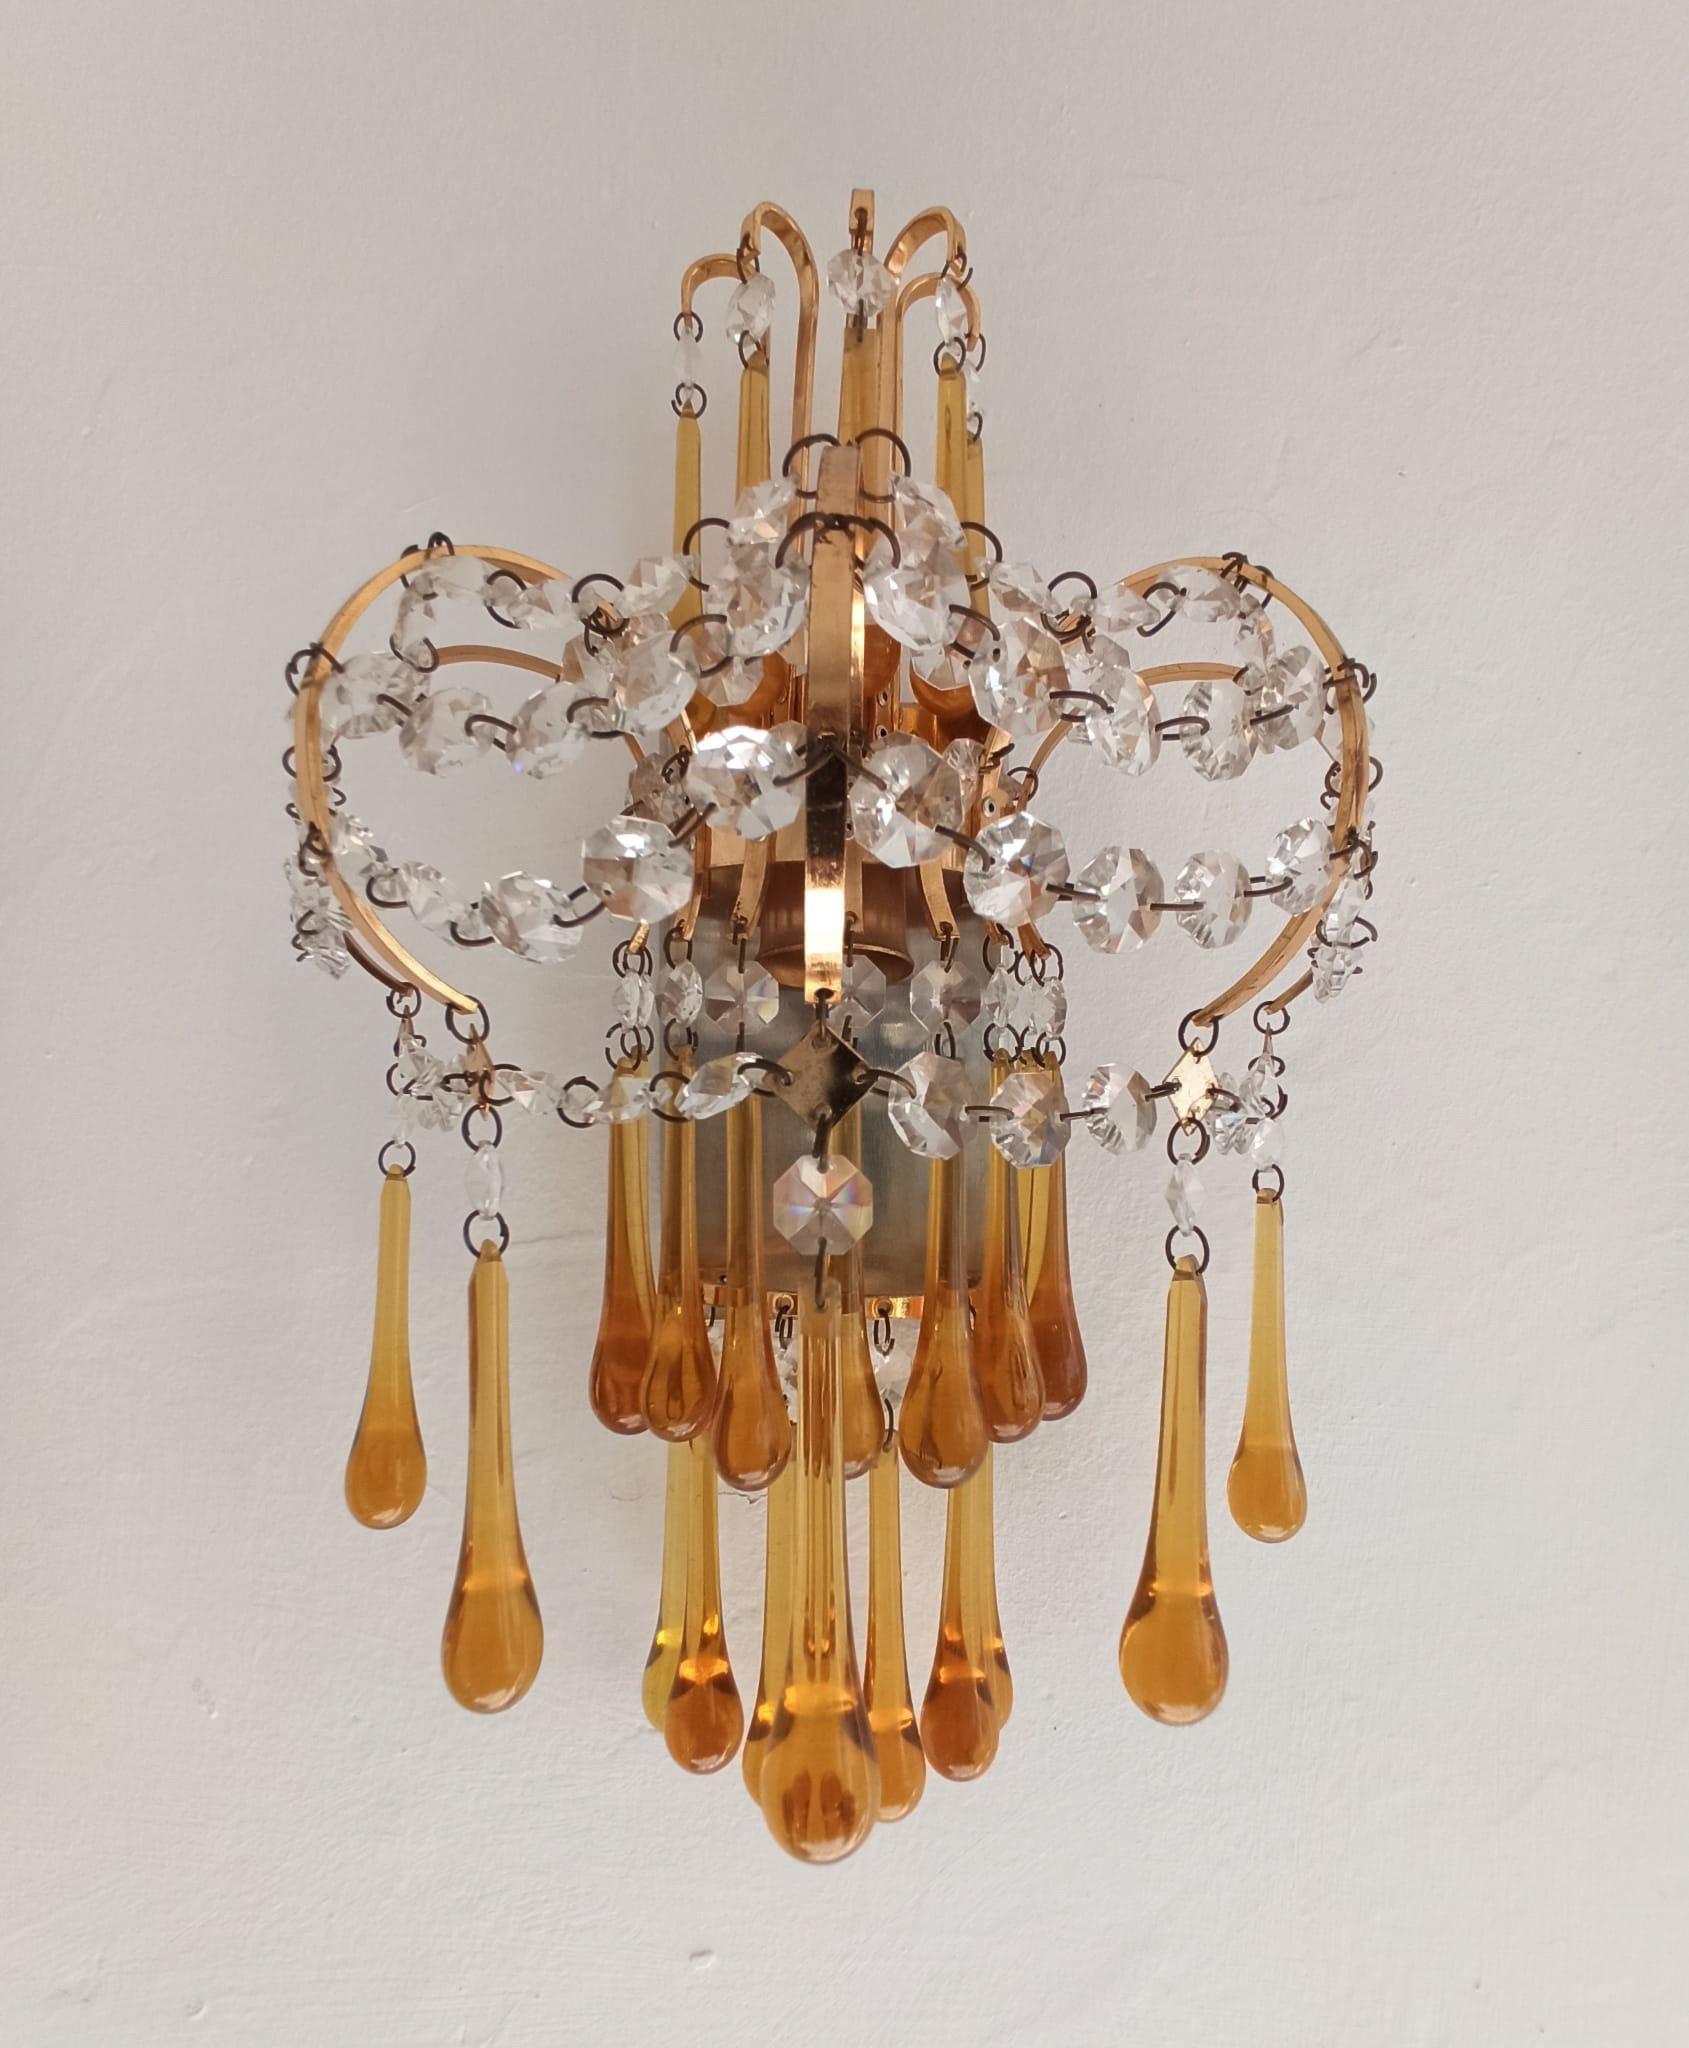 A beautiful original vintage Italian pair of wall lamps designed by Paolo Venini in the 1960s in brass and Murano glass surmounted at the top by a half moon crown of curved brass rods with amber glass drops suspended at the ends.
The structure is